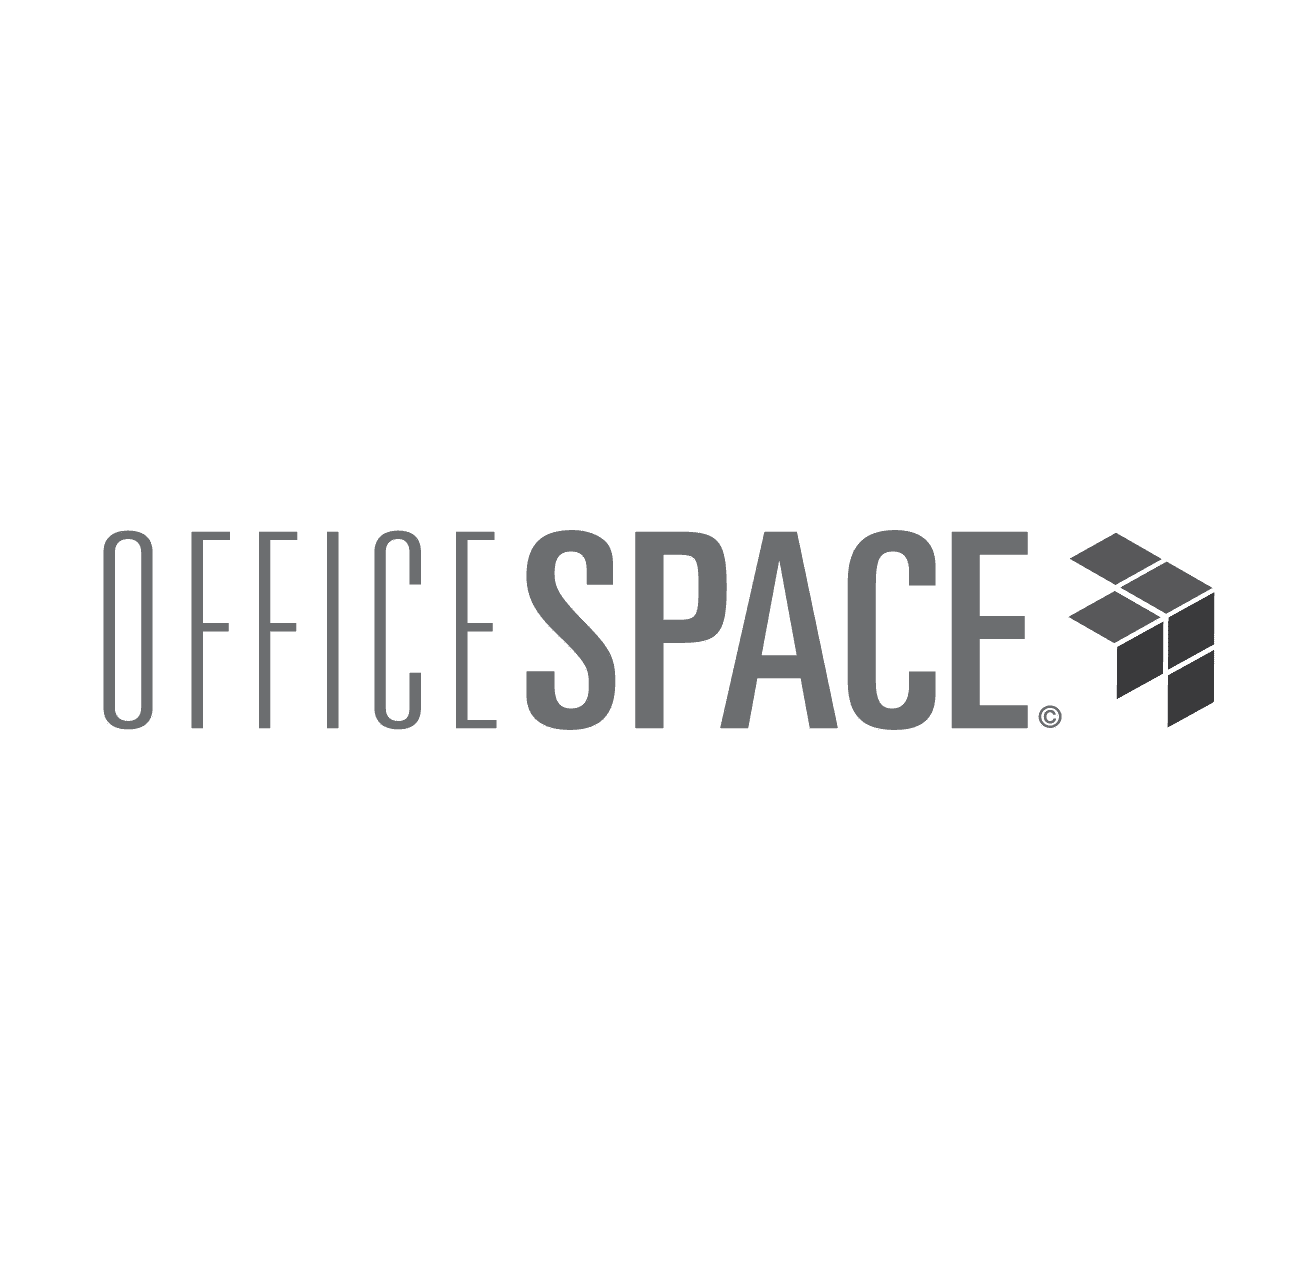 OfficeSpace